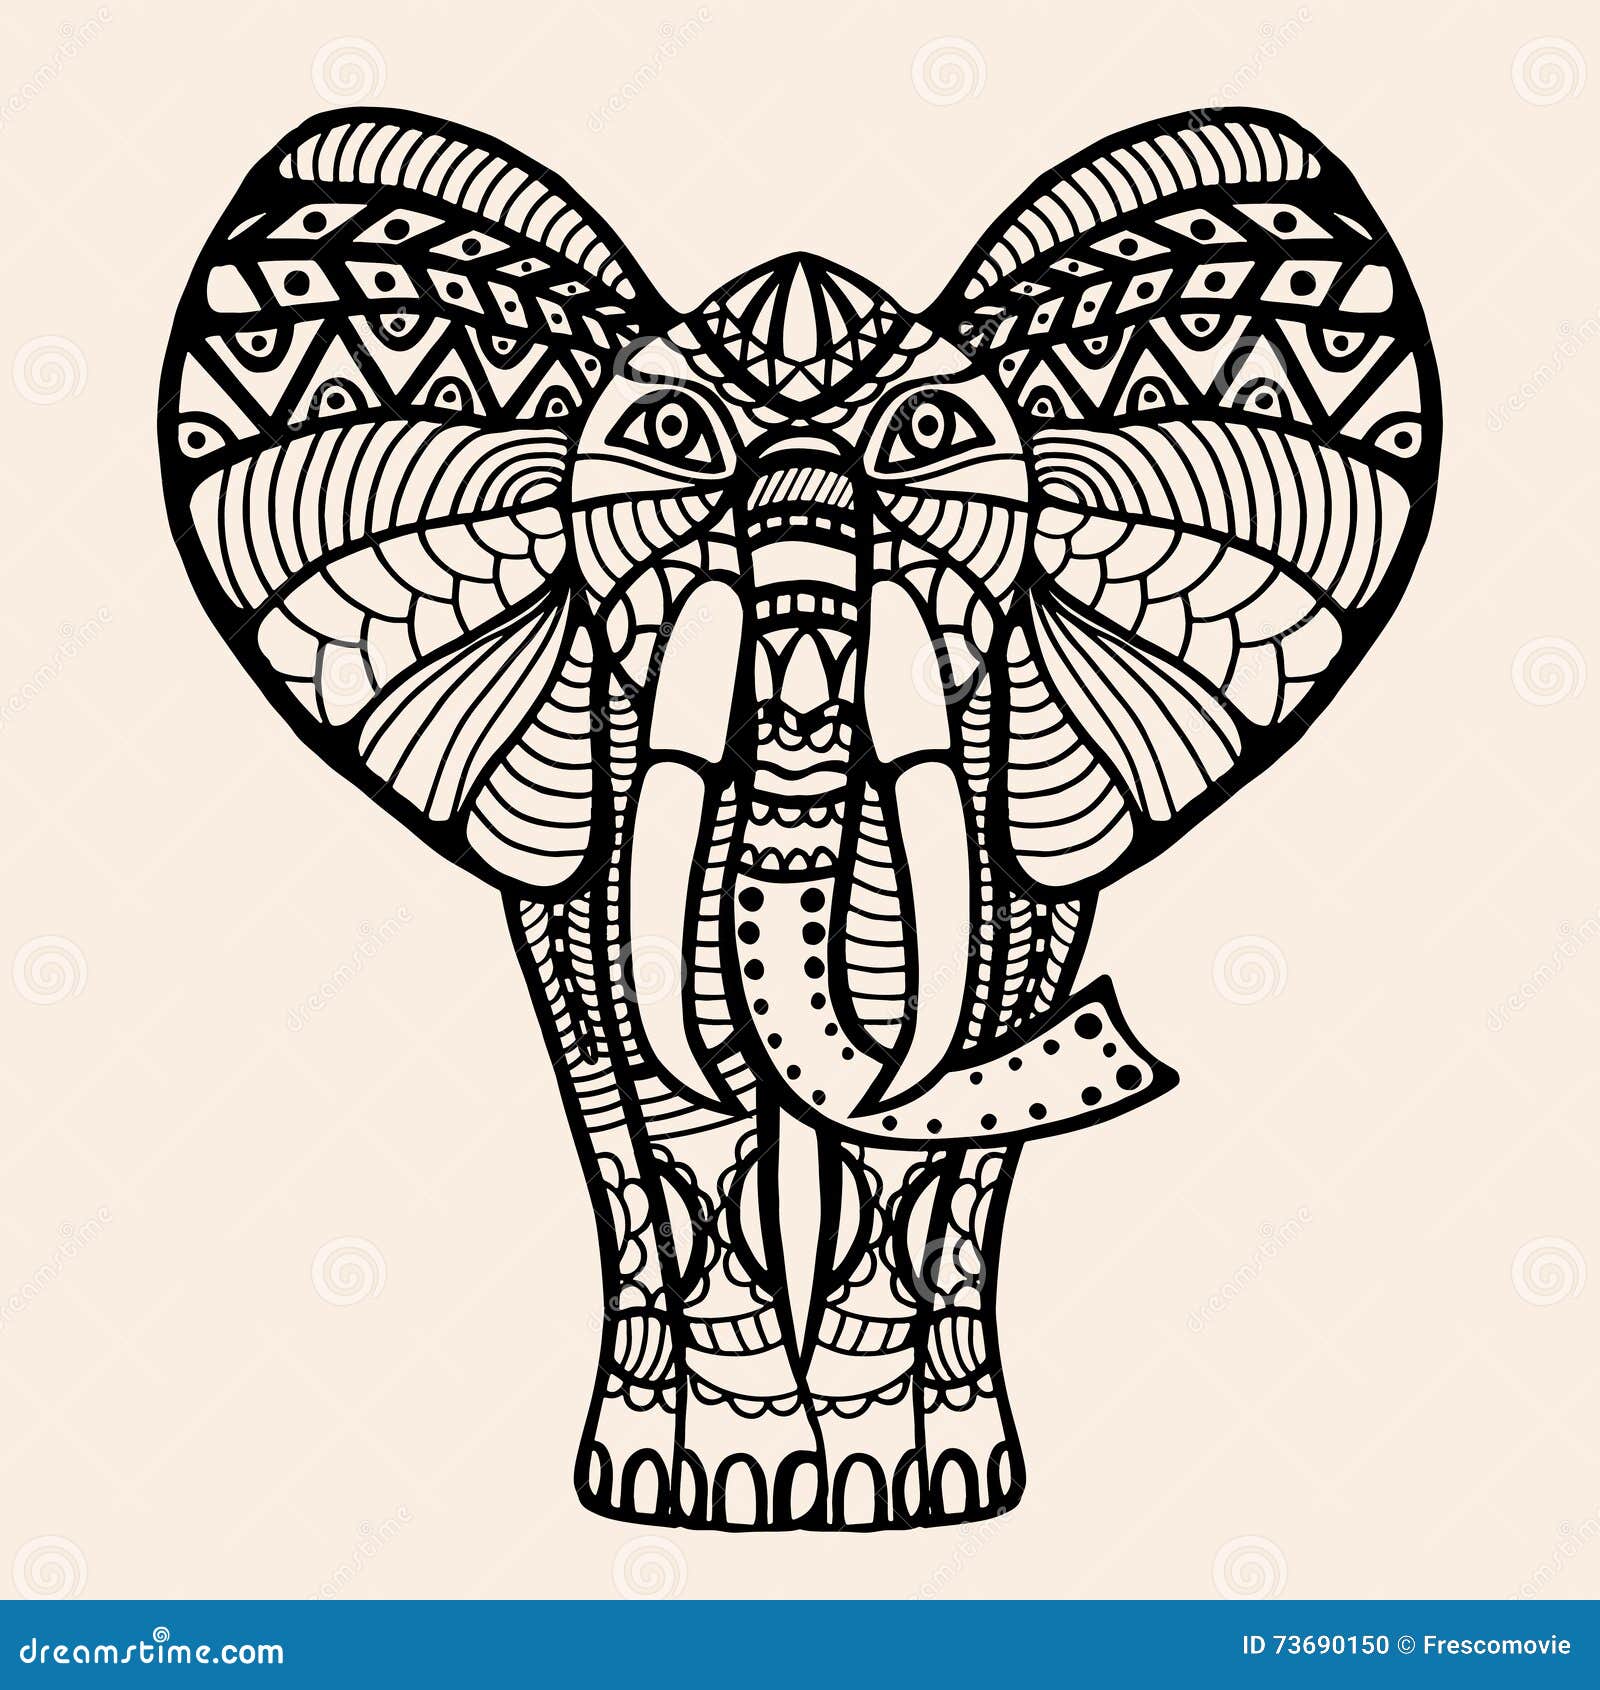 Mehndi indian henna tattoo design with elephants  greetings posters for  the wall  posters hindi embroidery 2  myloviewcom